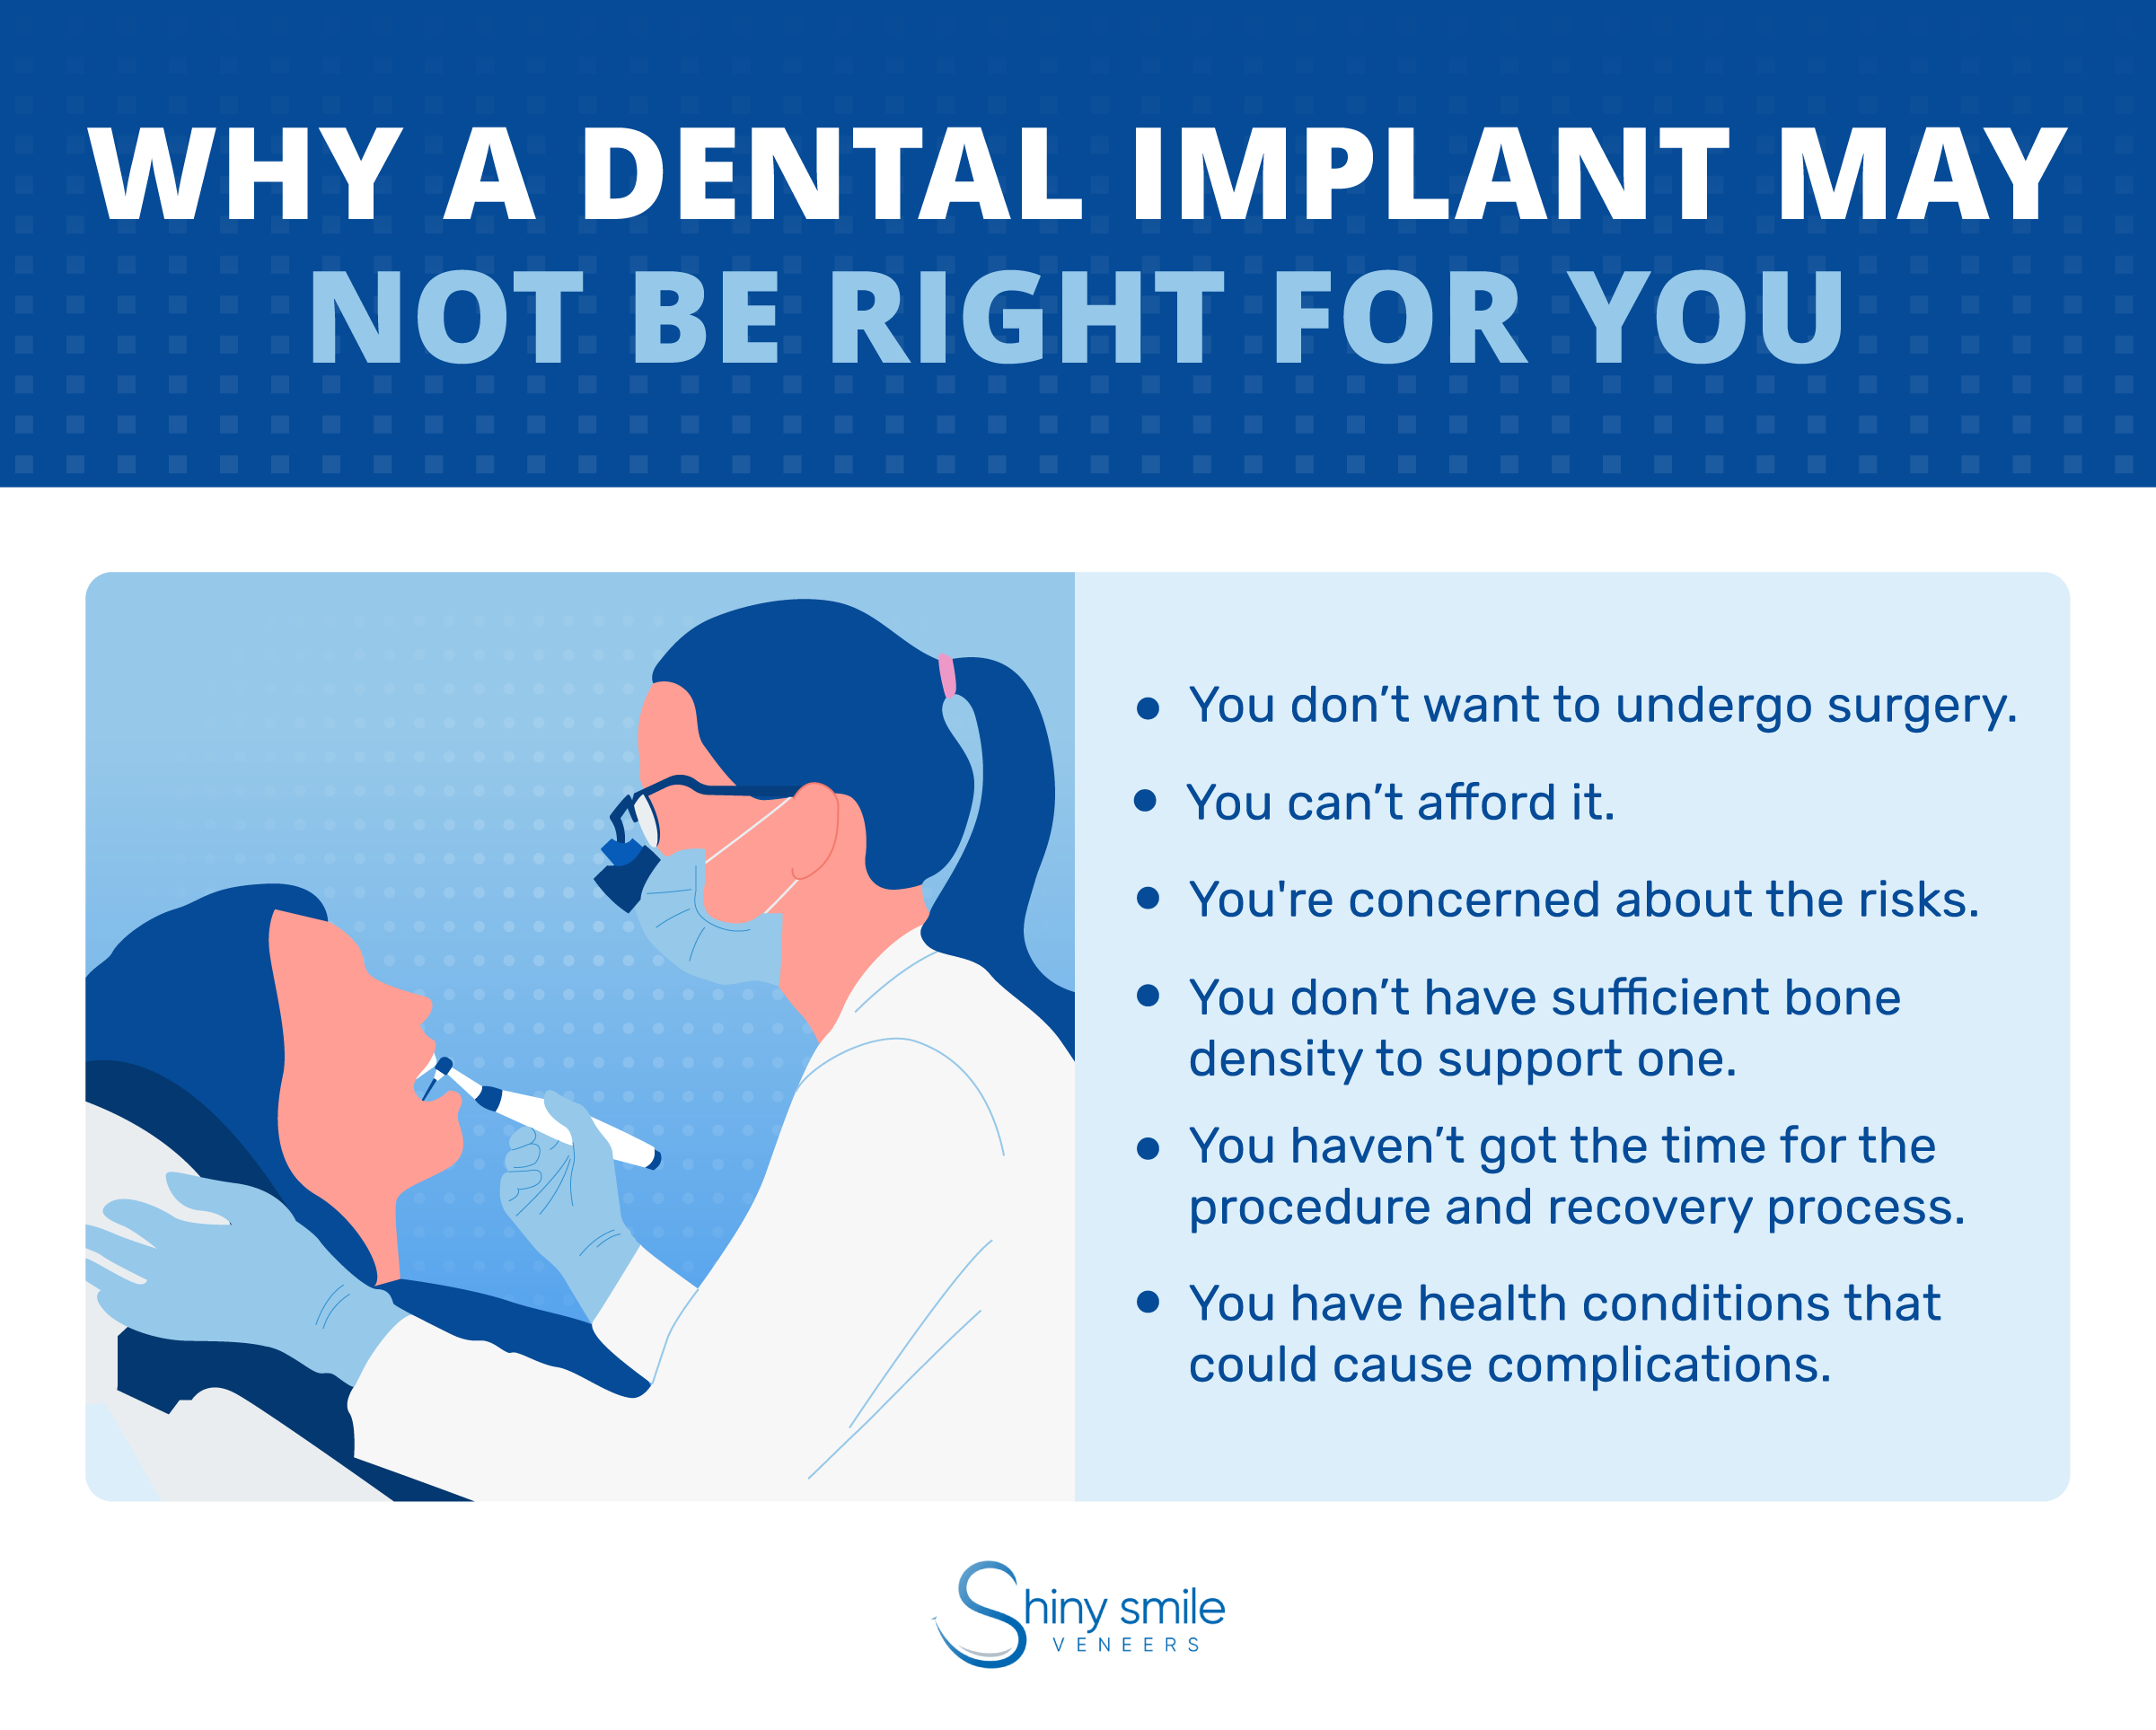 Why a dental implant may not be right for you